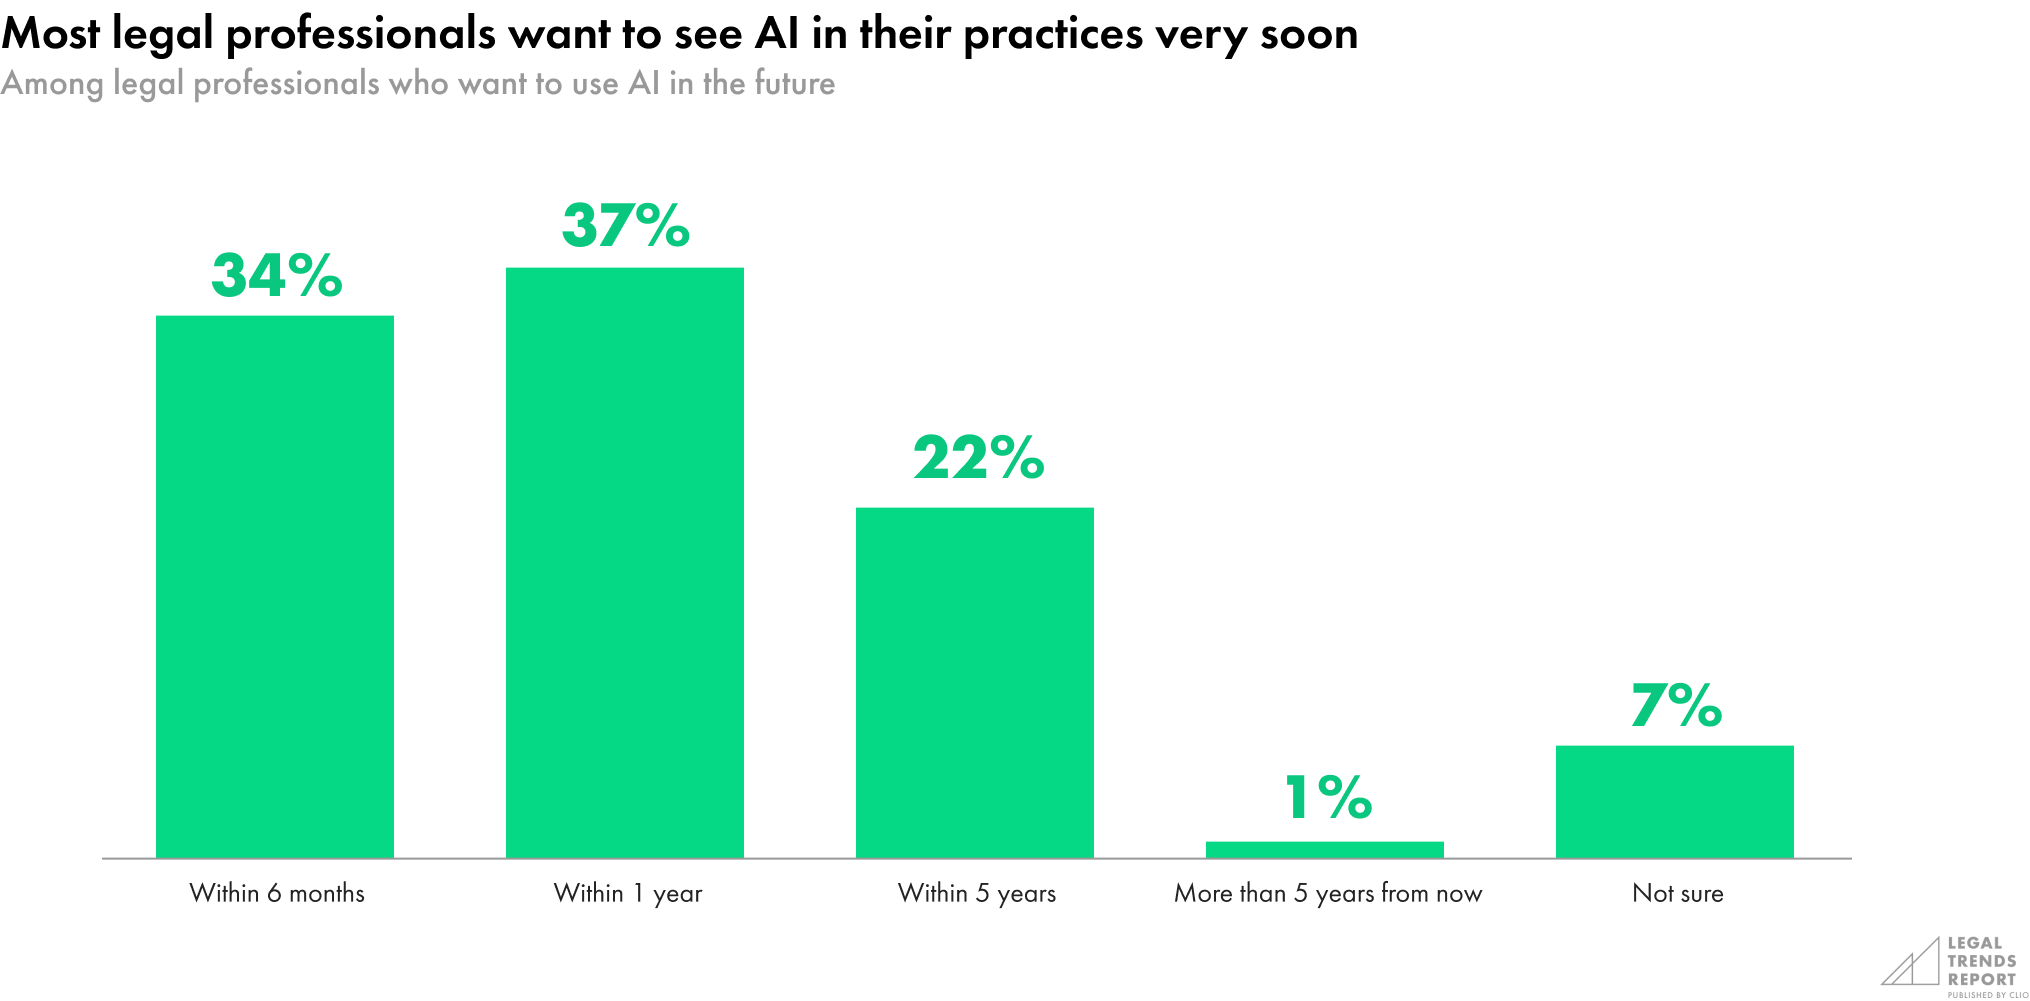 Most legal professionals want to see AI in their practices very soon